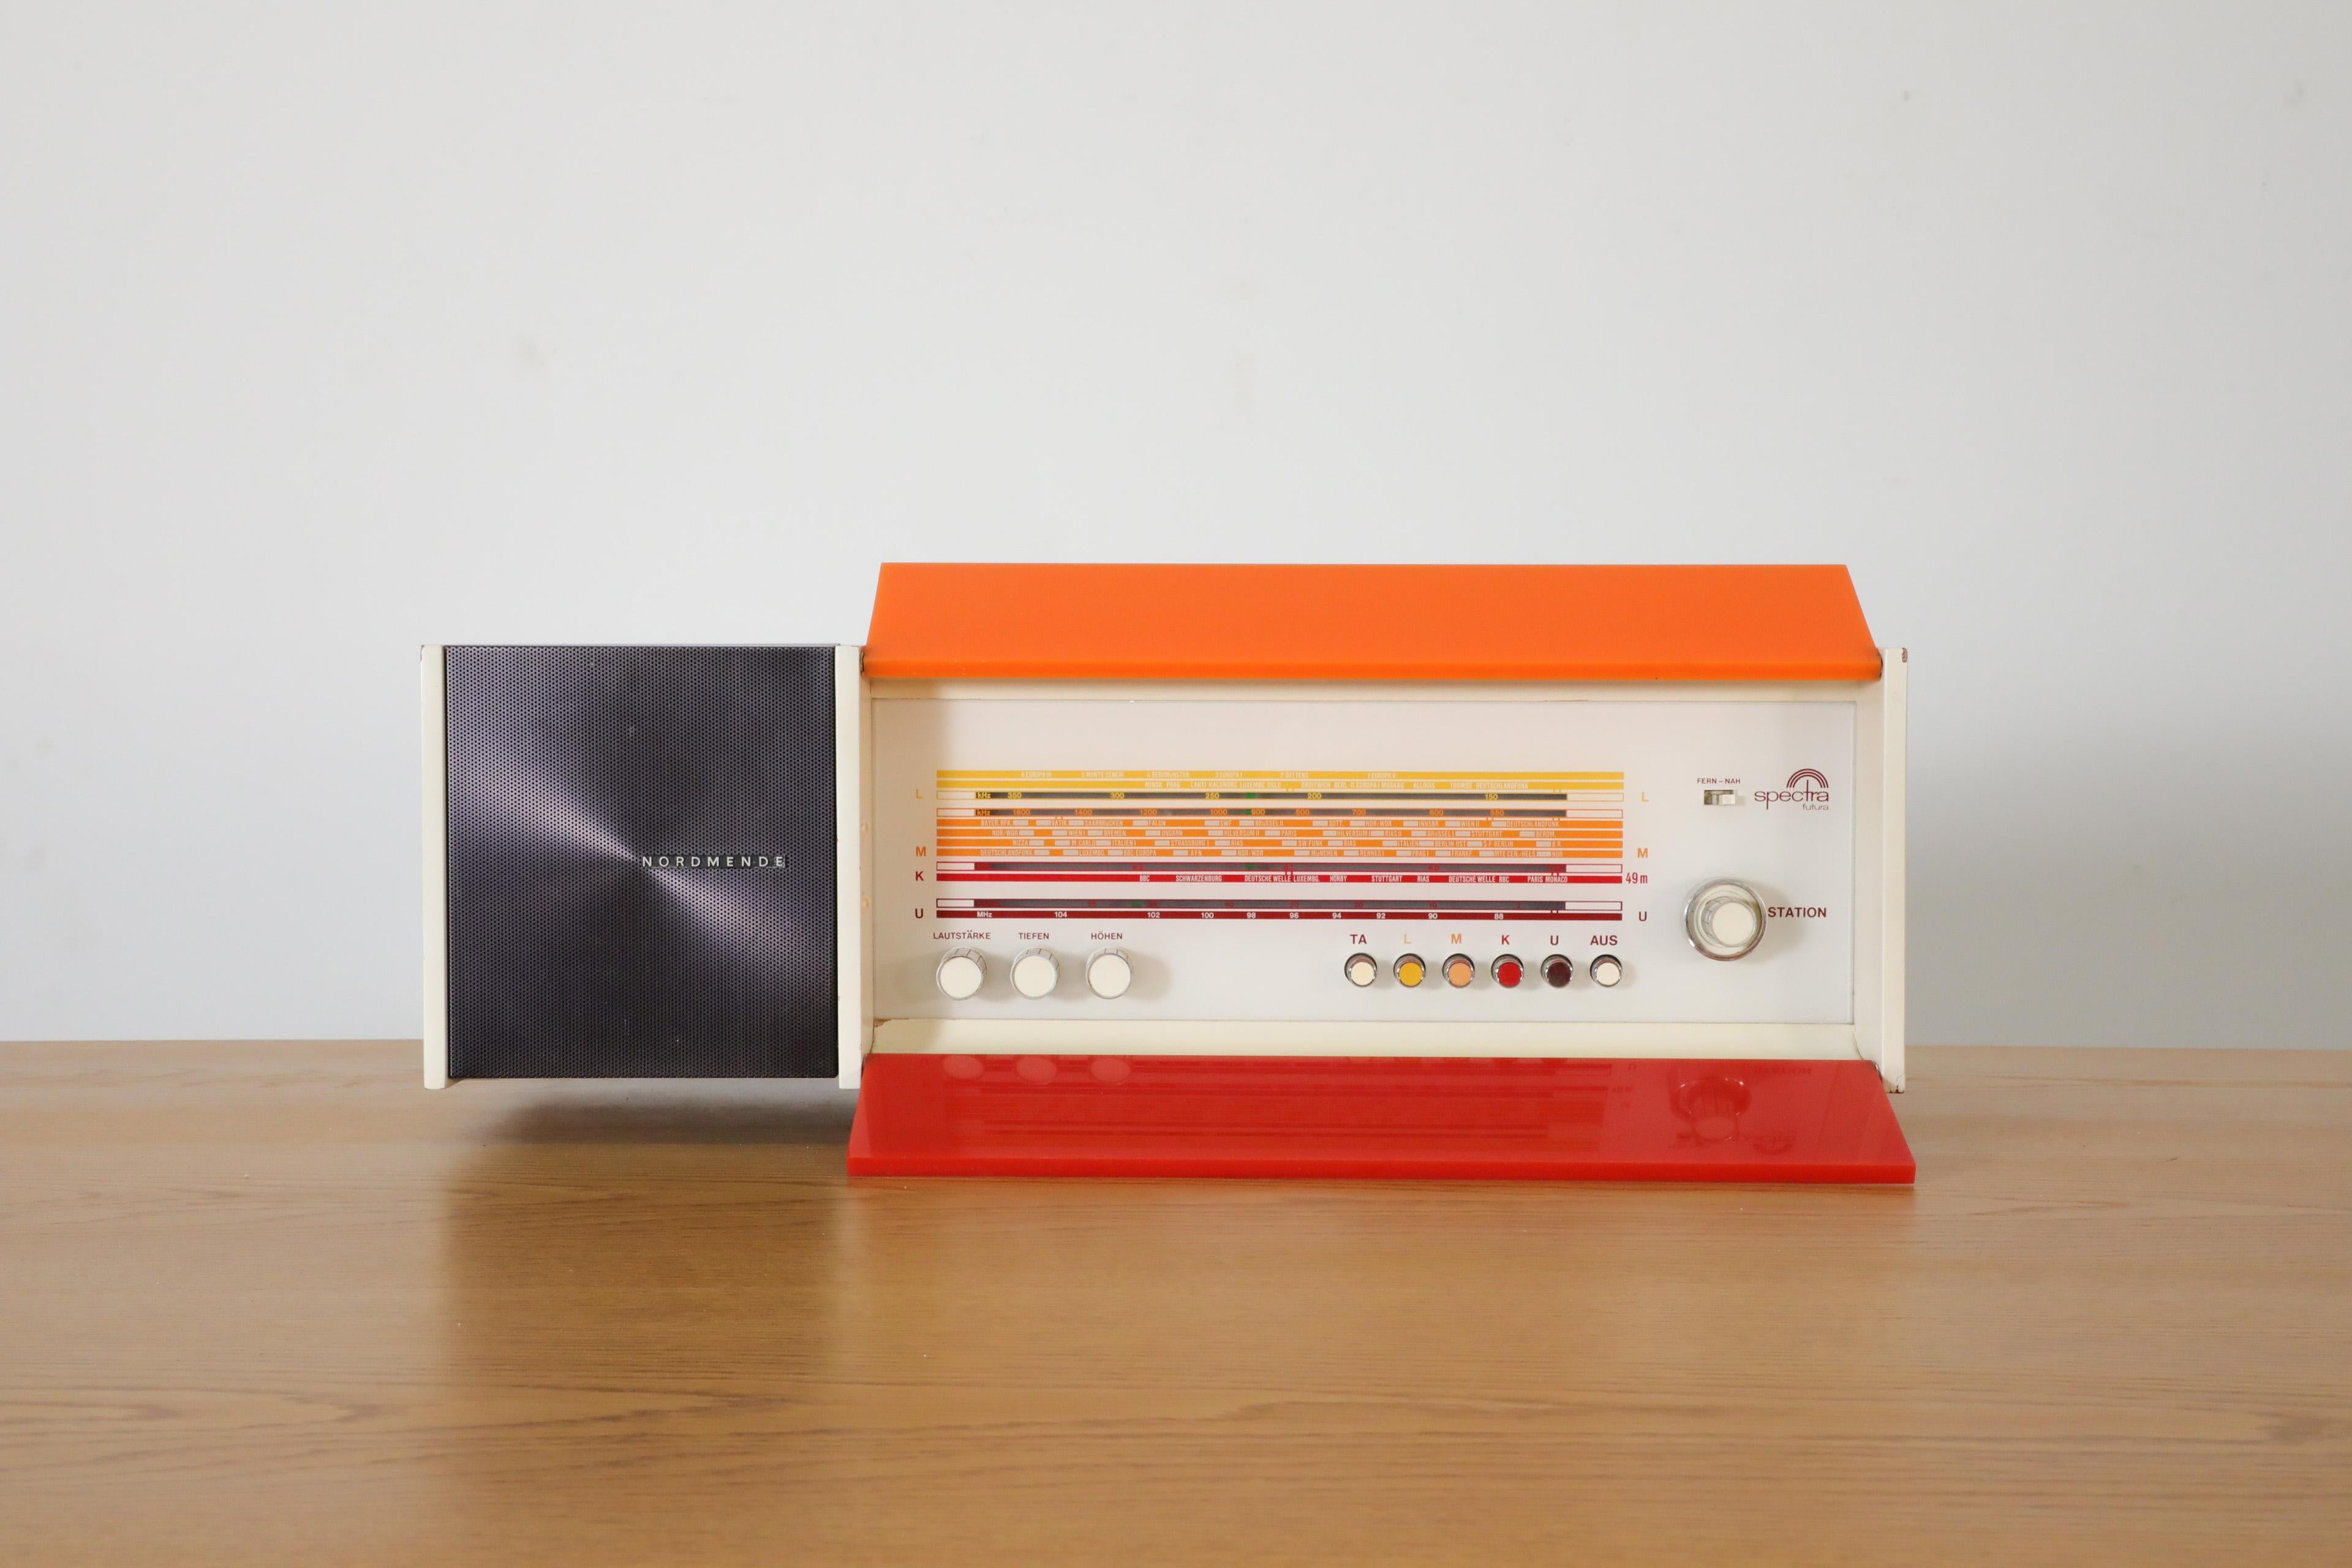 Mid-20th Century Raymond Loewy Designed Nordmende Spectra Futura Transistor Radio in Red & Orange For Sale